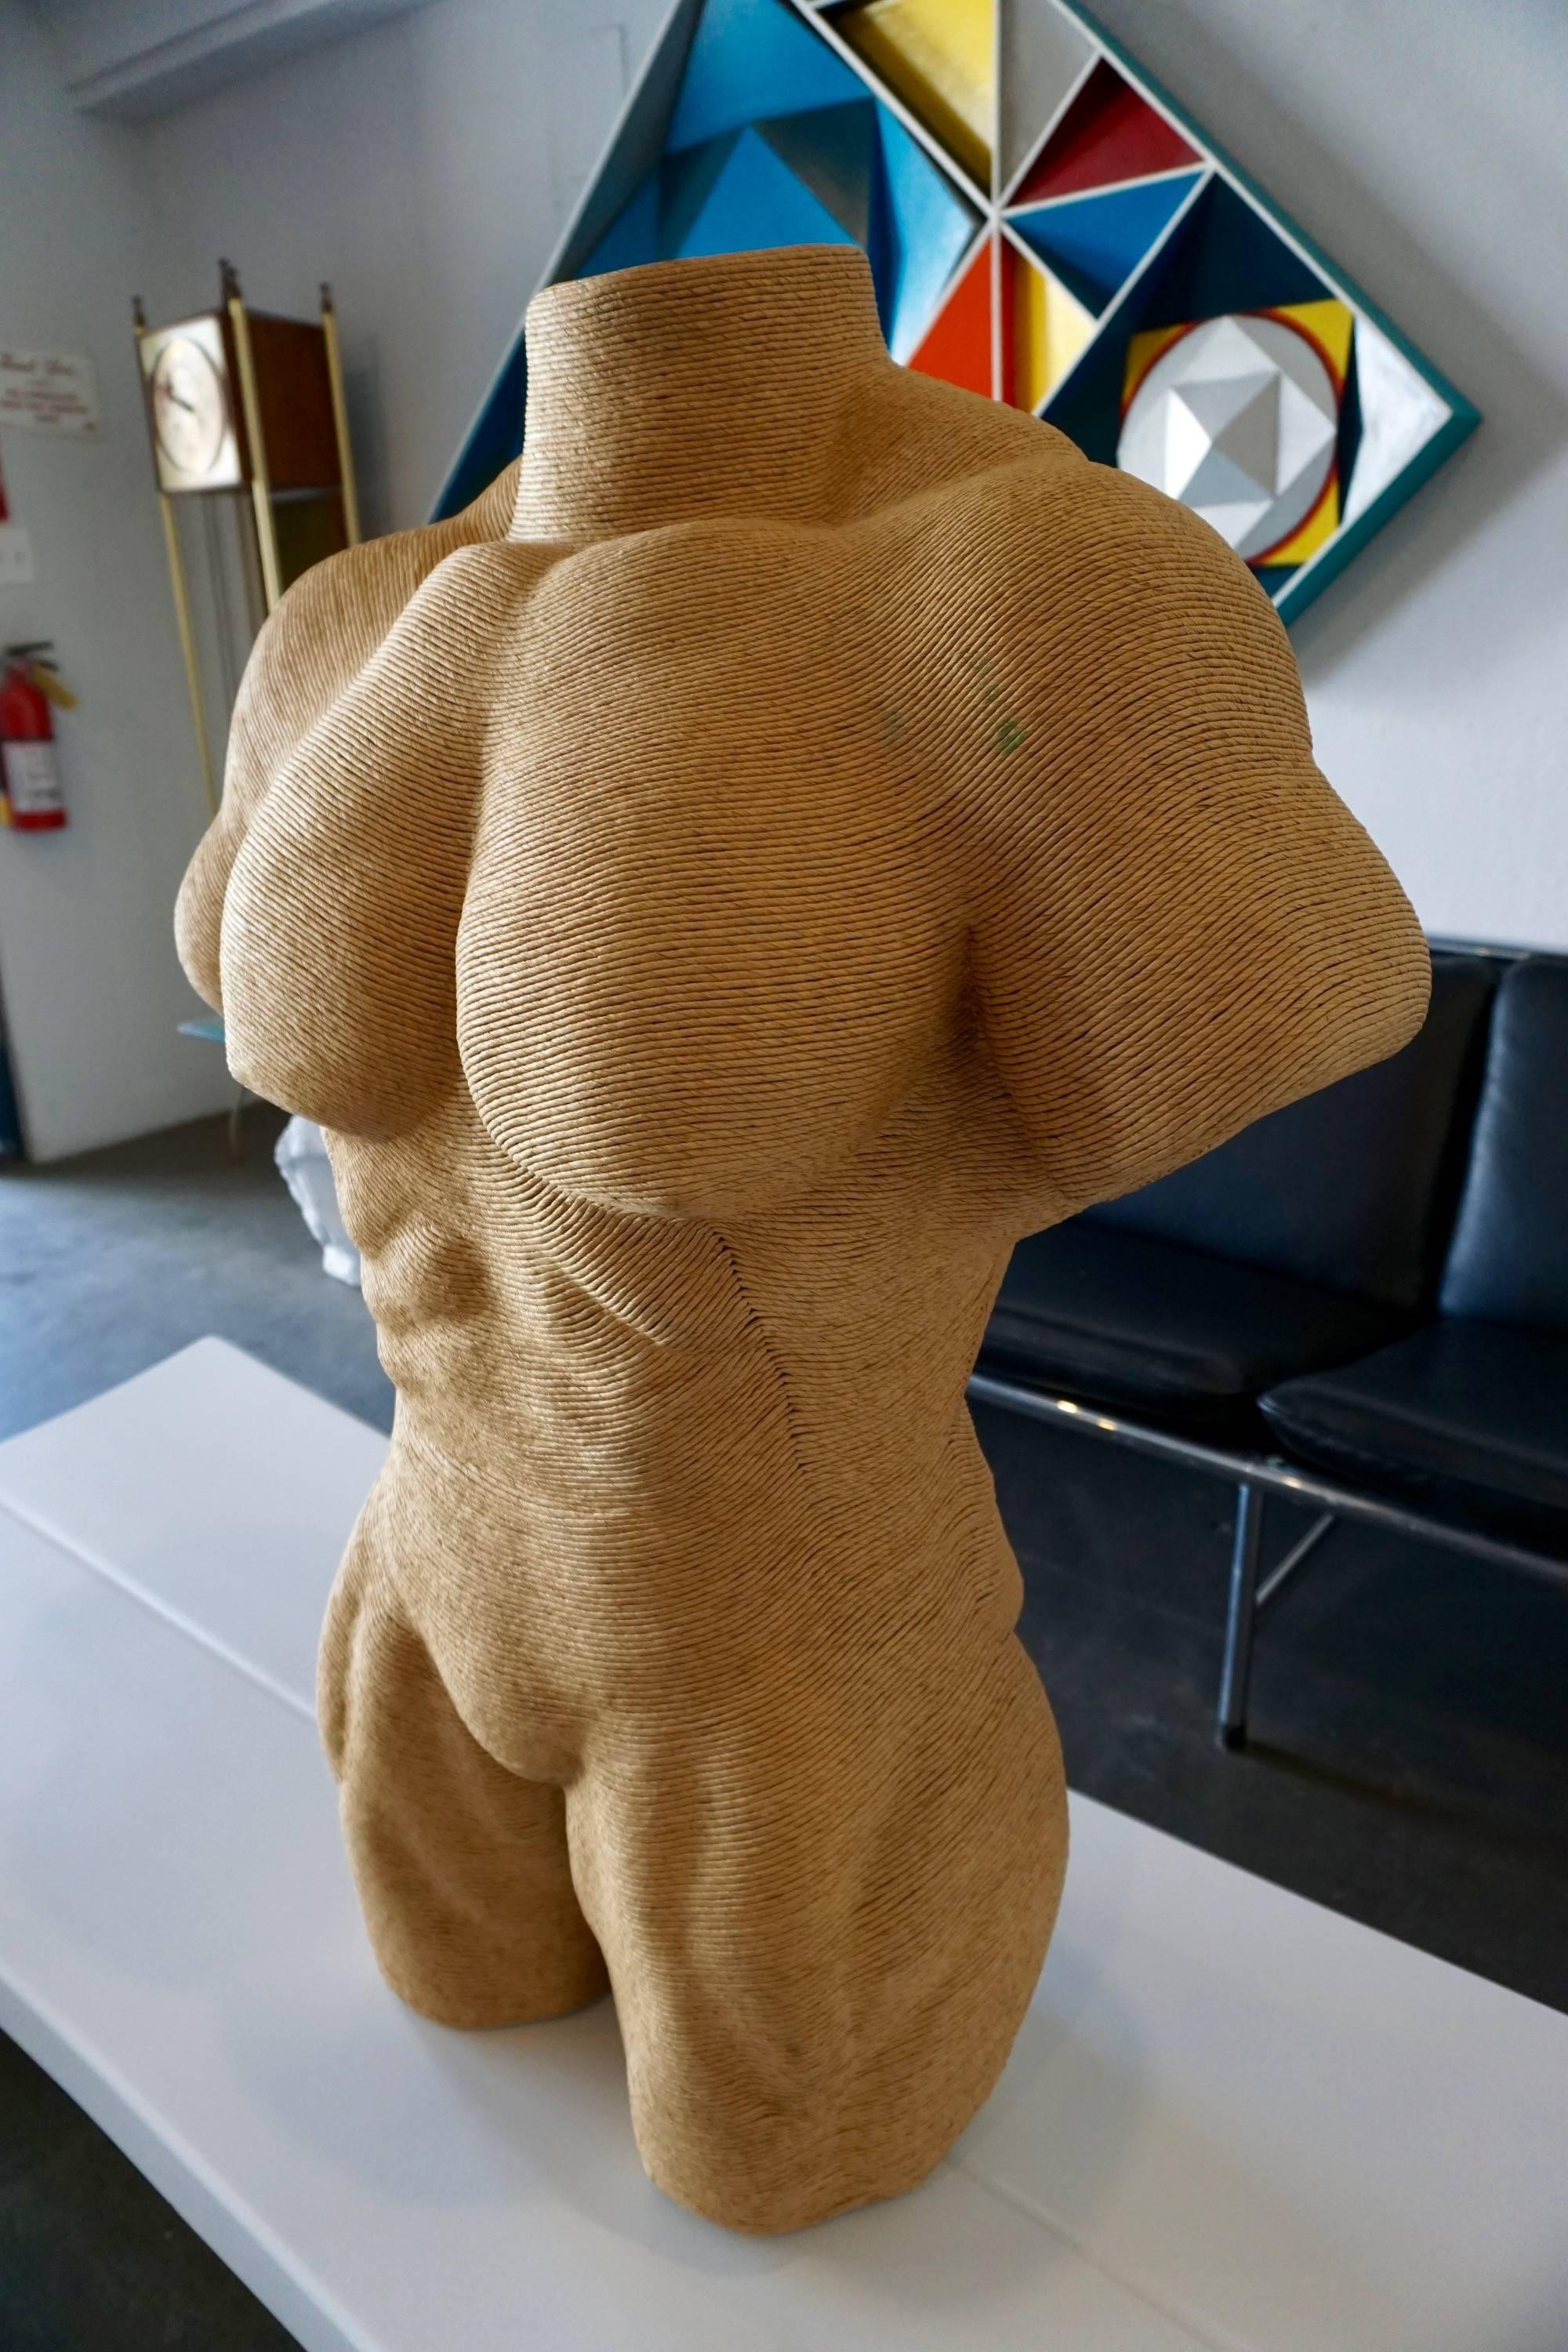 Molded torso wrapped in jute twine. Muscular body builder showing extreme physique.